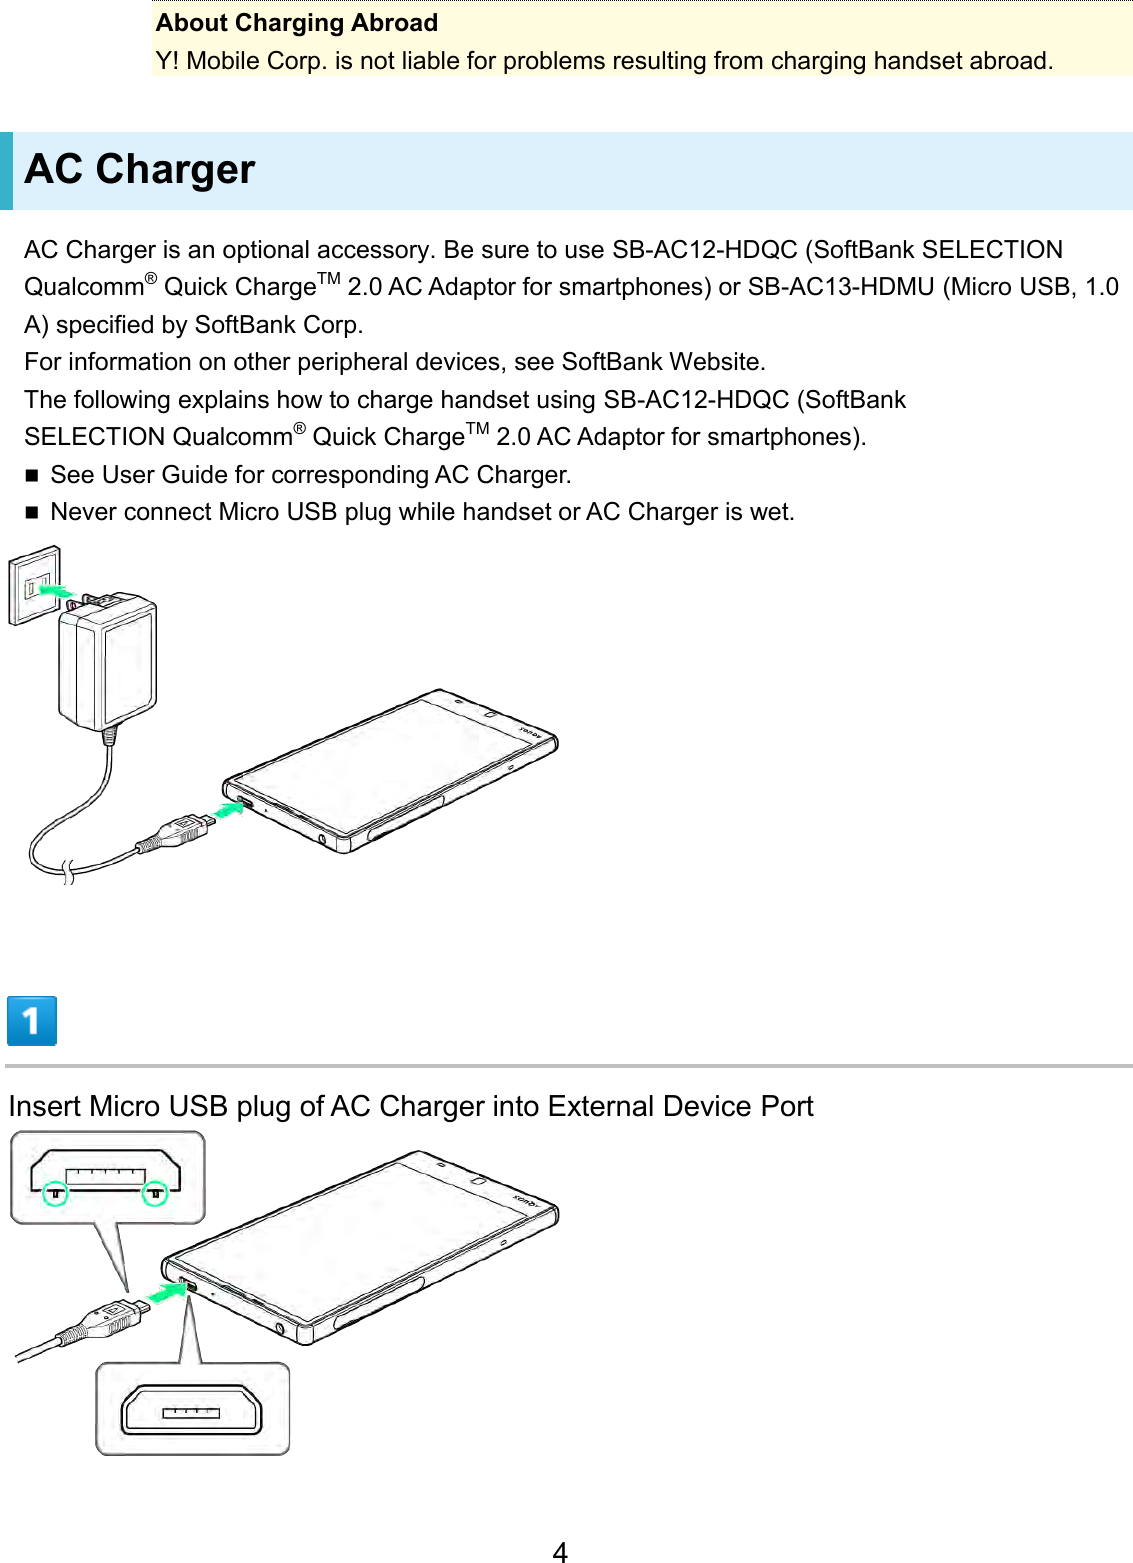 About Charging Abroad Y! Mobile Corp. is not liable for problems resulting from charging handset abroad. AC Charger AC Charger is an optional accessory. Be sure to use SB-AC12-HDQC (SoftBank SELECTION Qualcomm® Quick ChargeTM 2.0 AC Adaptor for smartphones) or SB-AC13-HDMU (Micro USB, 1.0 A) specified by SoftBank Corp.For information on other peripheral devices, see SoftBank Website. The following explains how to charge handset using SB-AC12-HDQC (SoftBank SELECTION Qualcomm® Quick ChargeTM 2.0 AC Adaptor for smartphones). See User Guide for corresponding AC Charger.Never connect Micro USB plug while handset or AC Charger is wet.Insert Micro USB plug of AC Charger into External Device Port 4